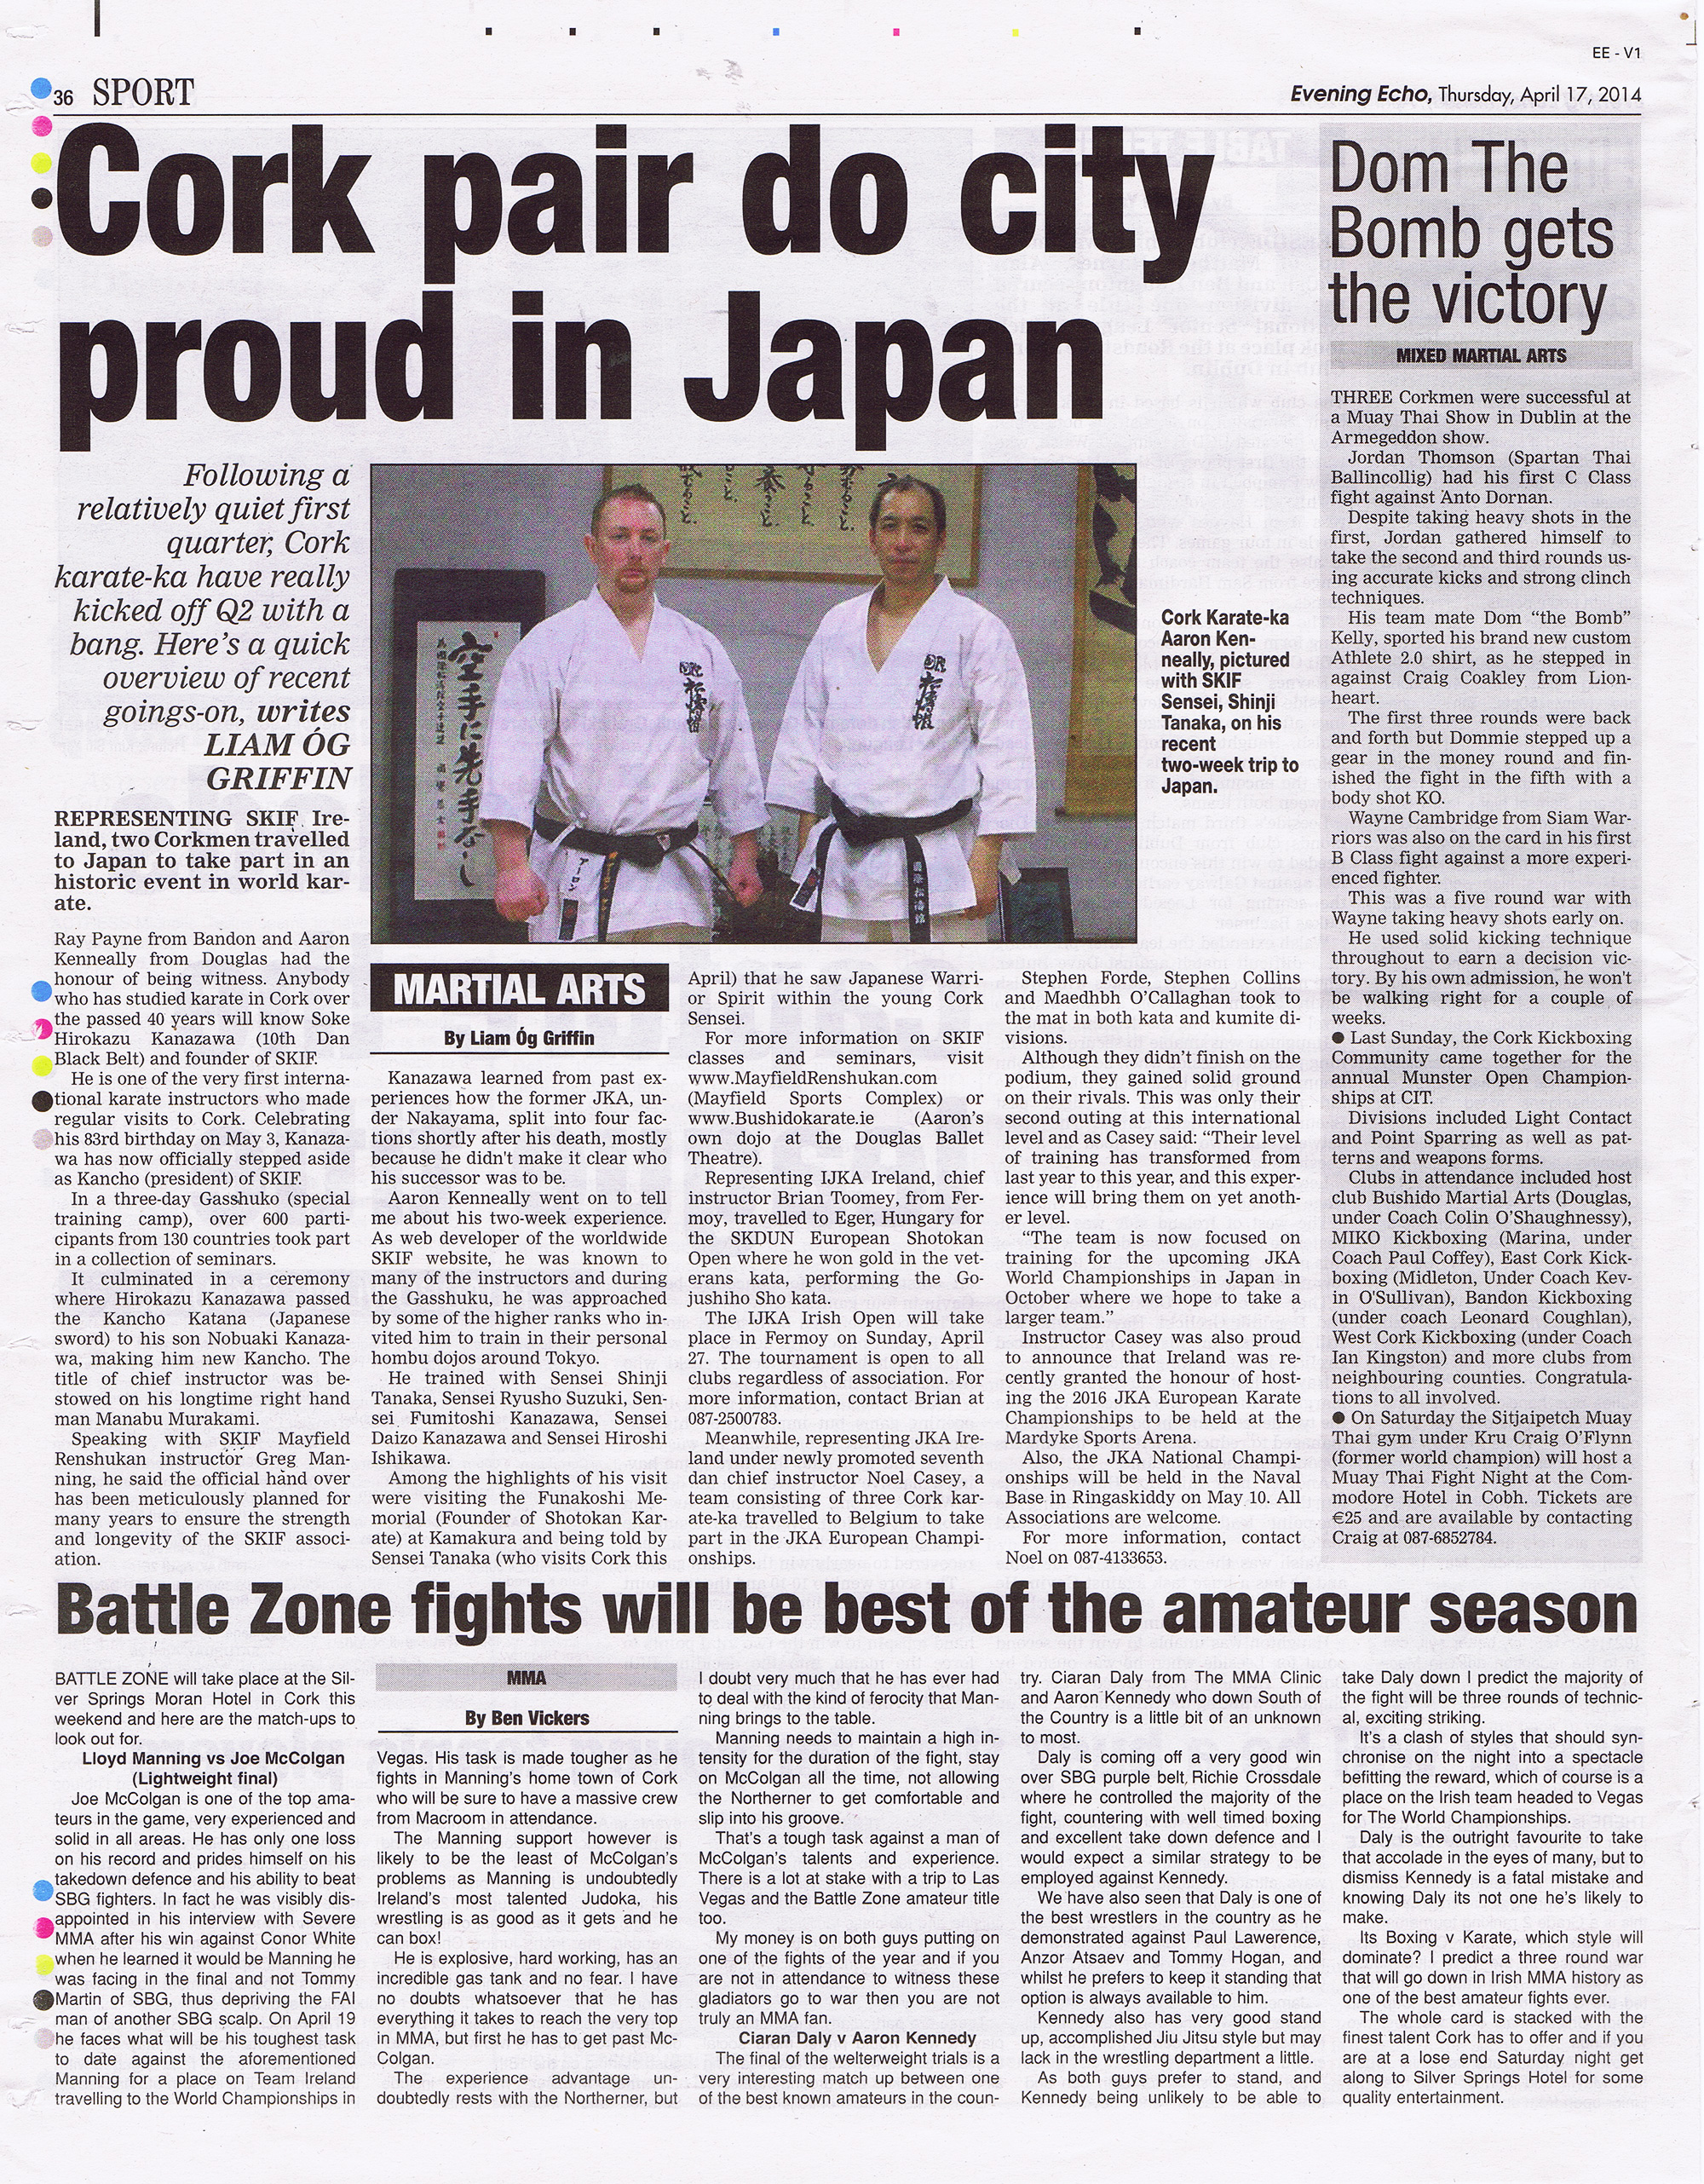 Evening Echo Feature - Cork pair do city proud in Japan